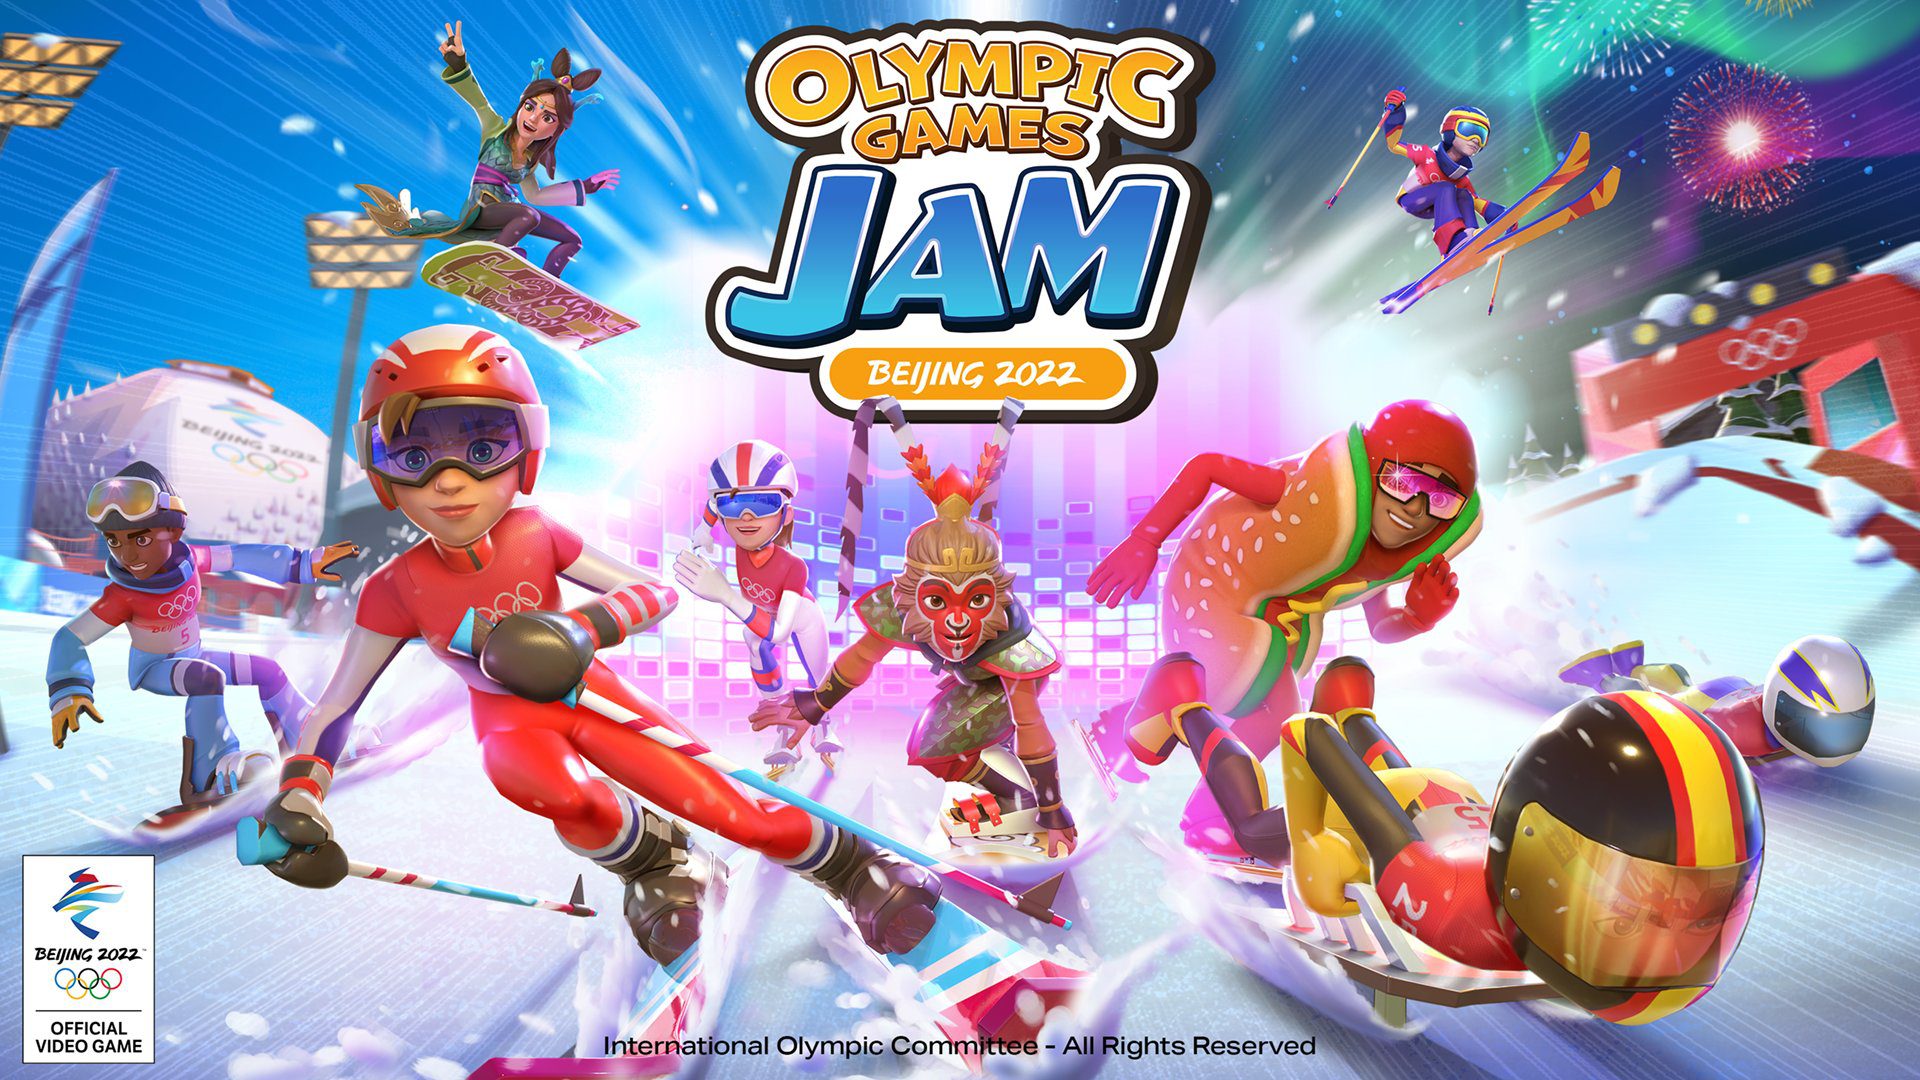 Olympic Games Jam: Beijing 2022 unveiled, a play-to-earn party game coming February 3